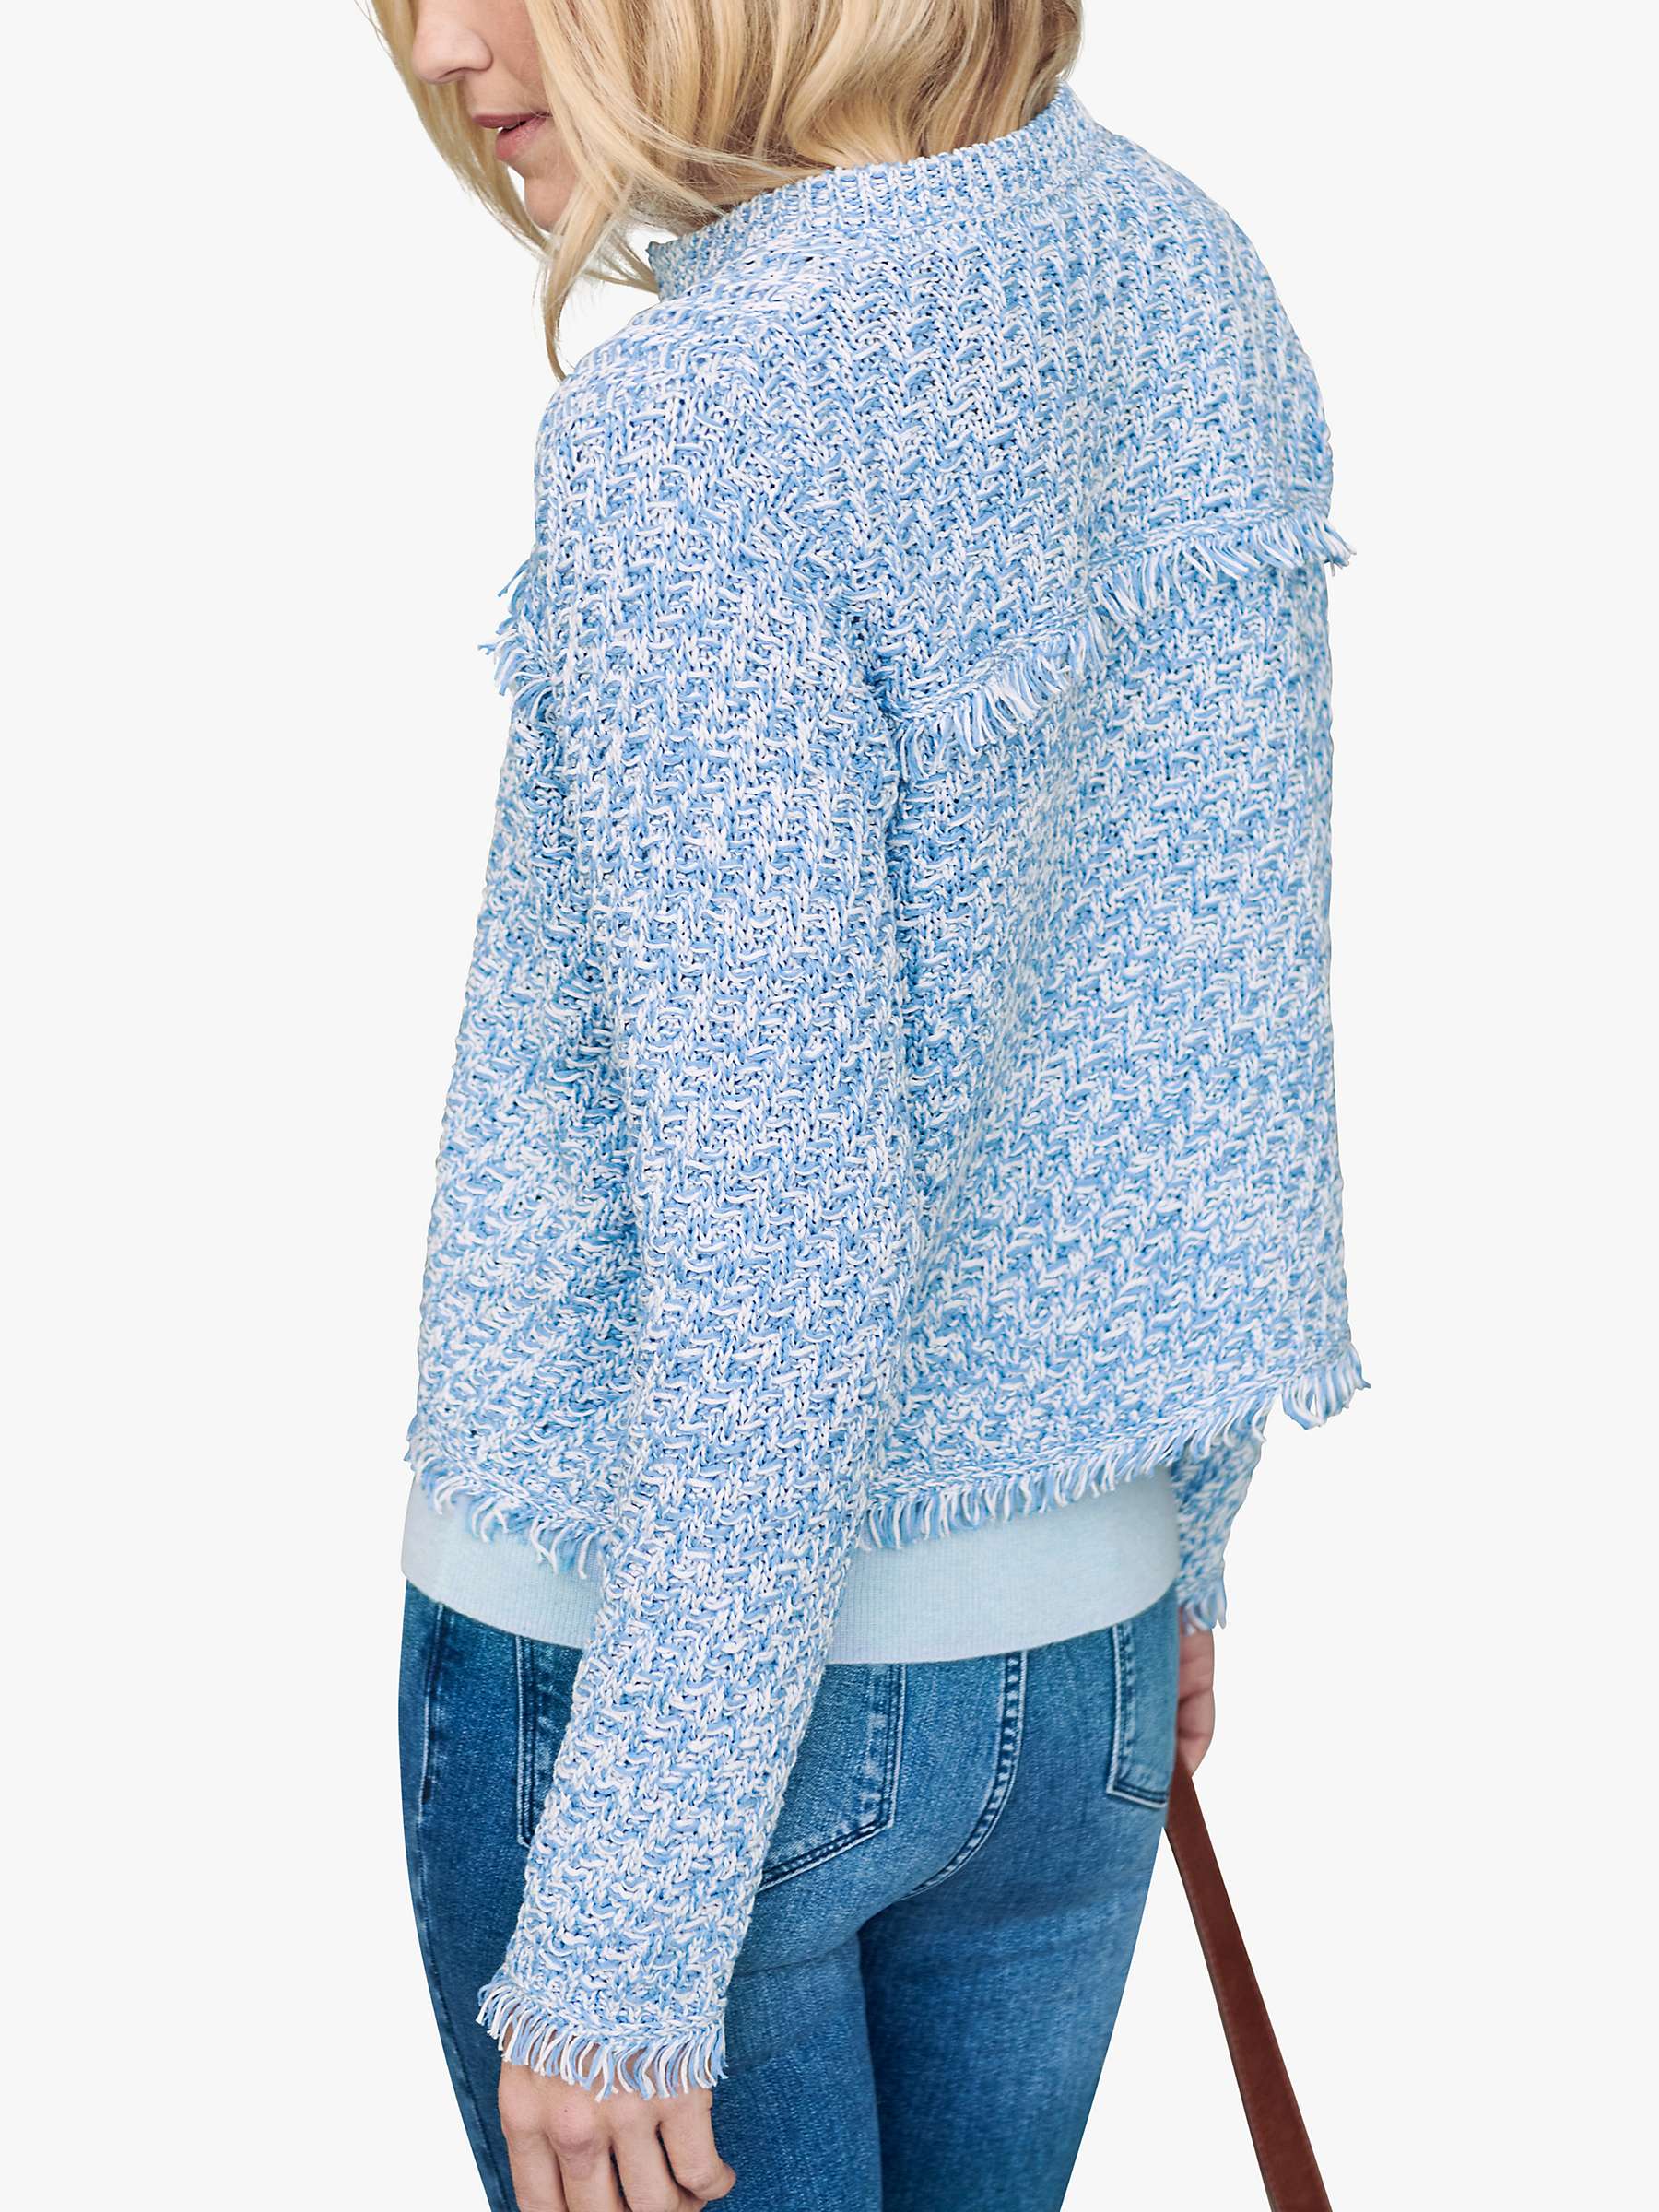 Buy Pure Collection Textured Knit Jacket Online at johnlewis.com